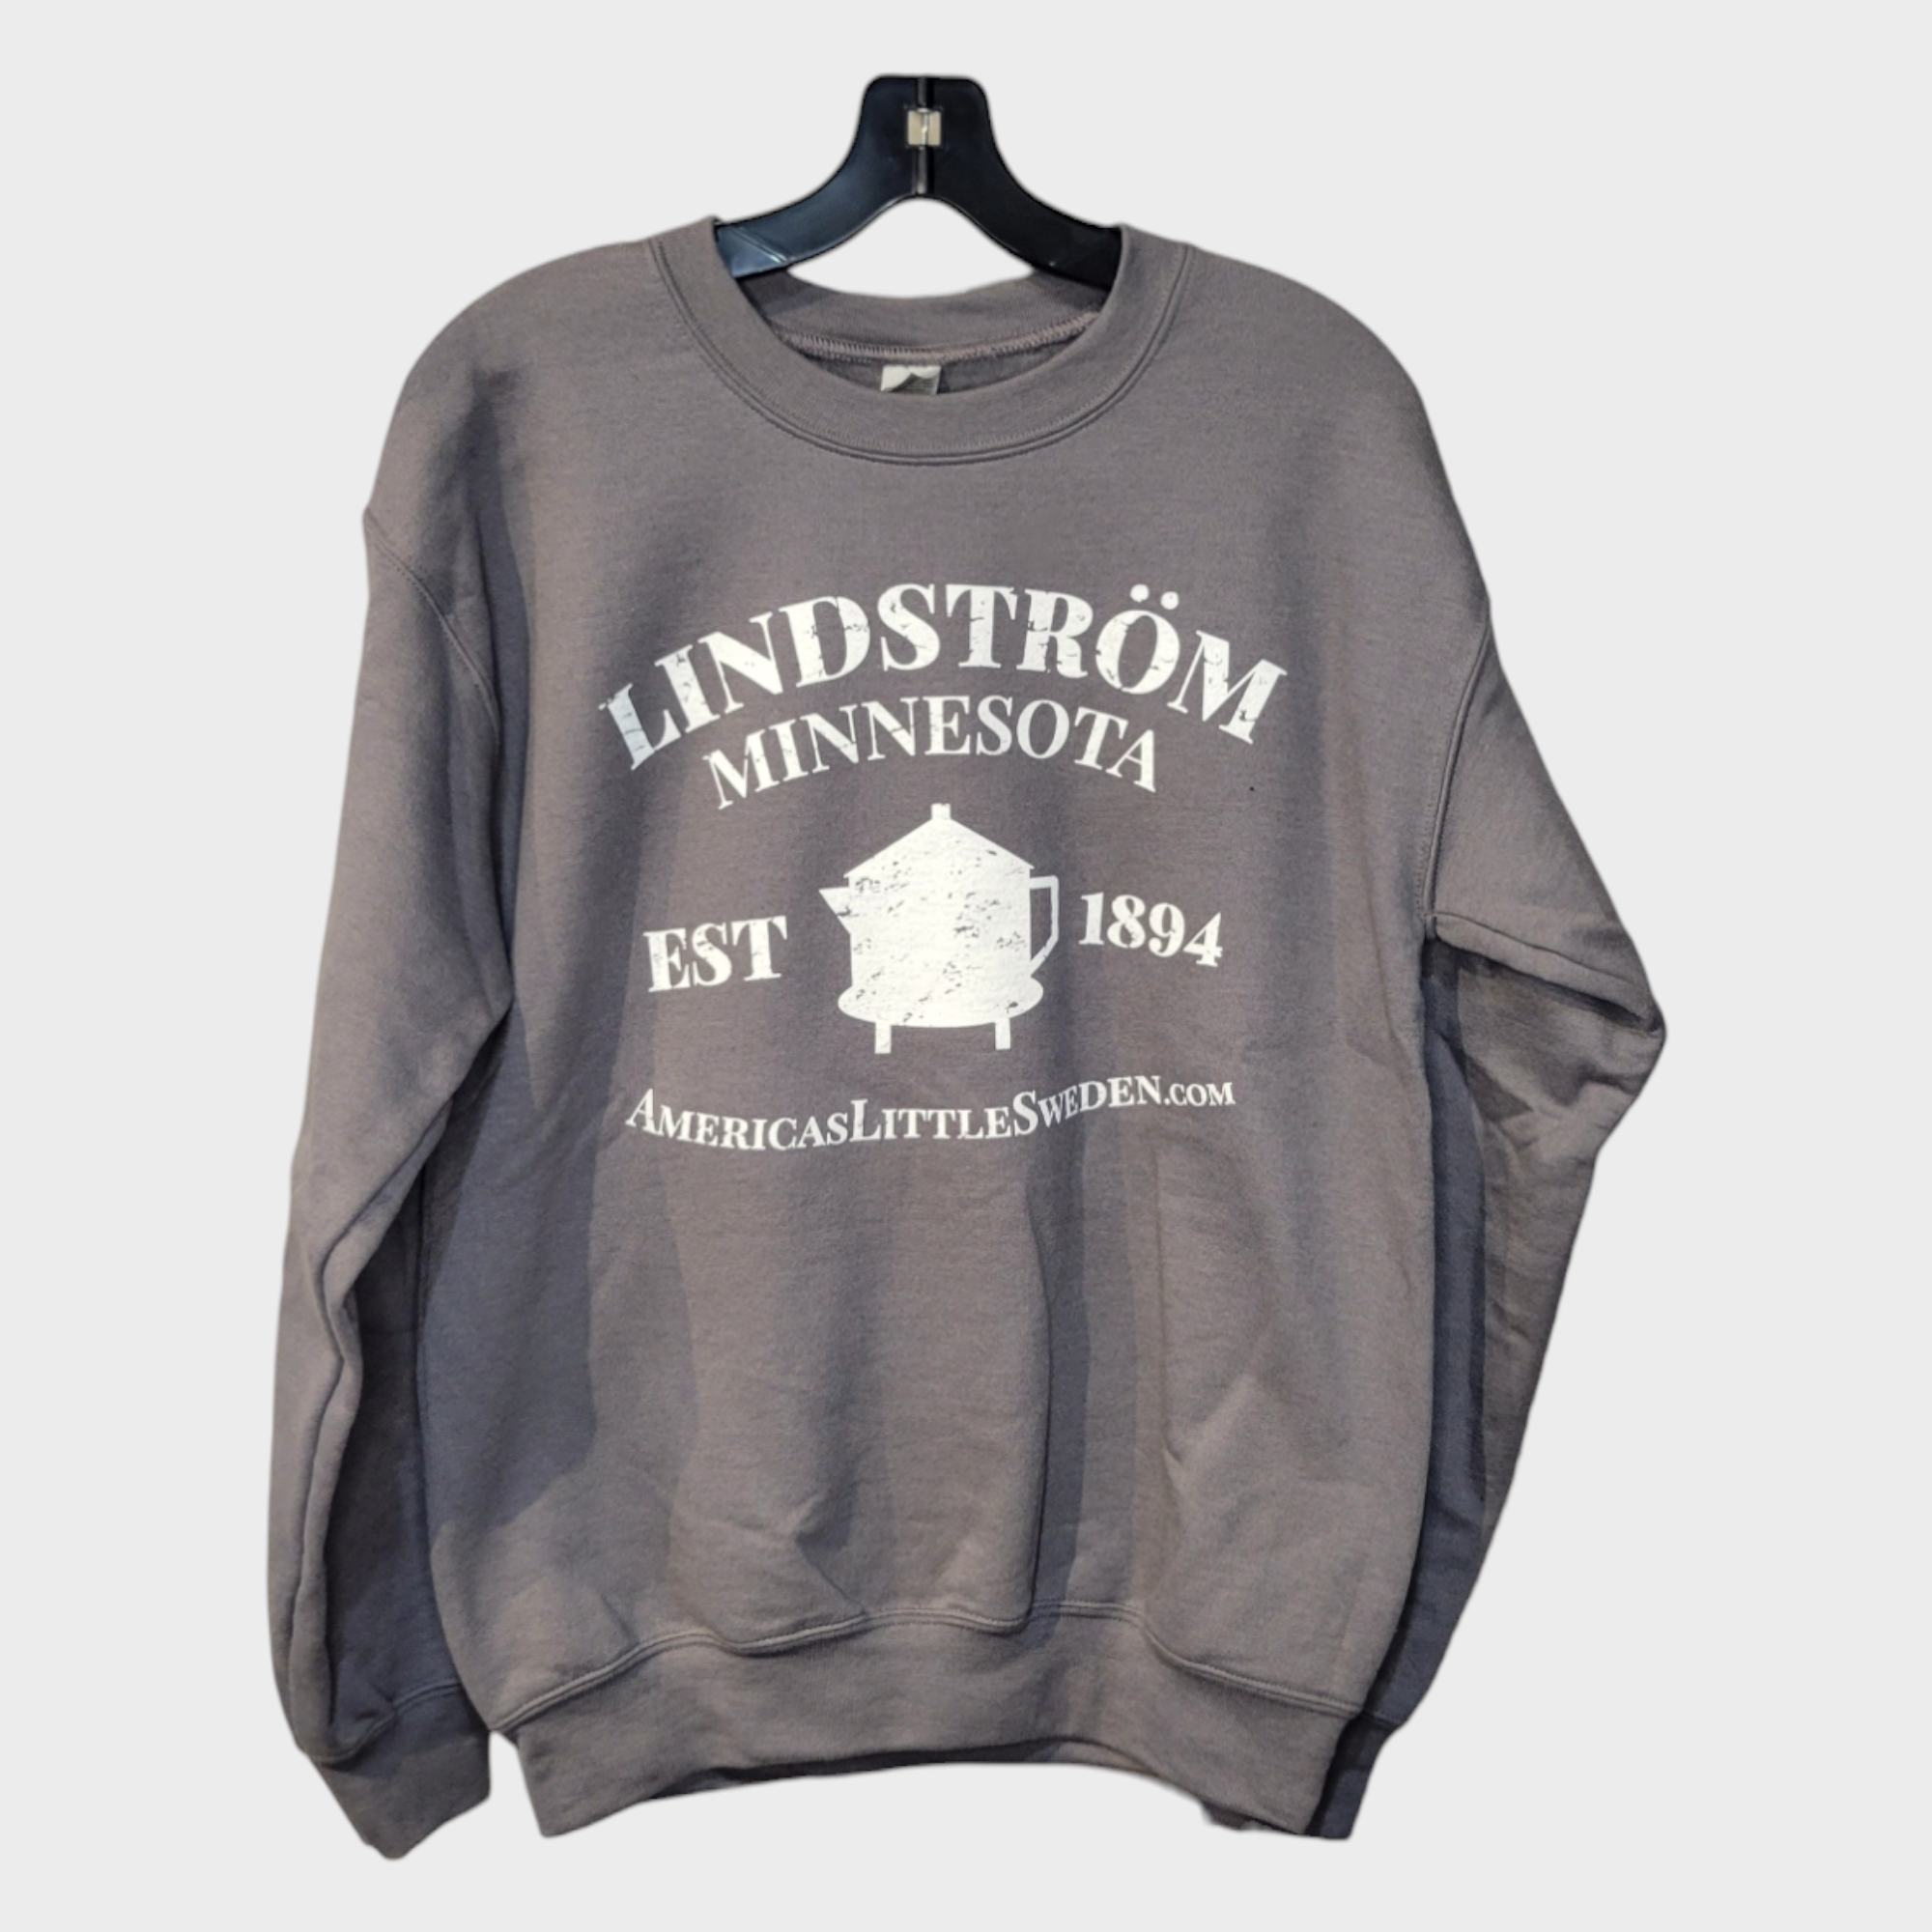 Sweater: Lindstrom Water Tower Crewneck